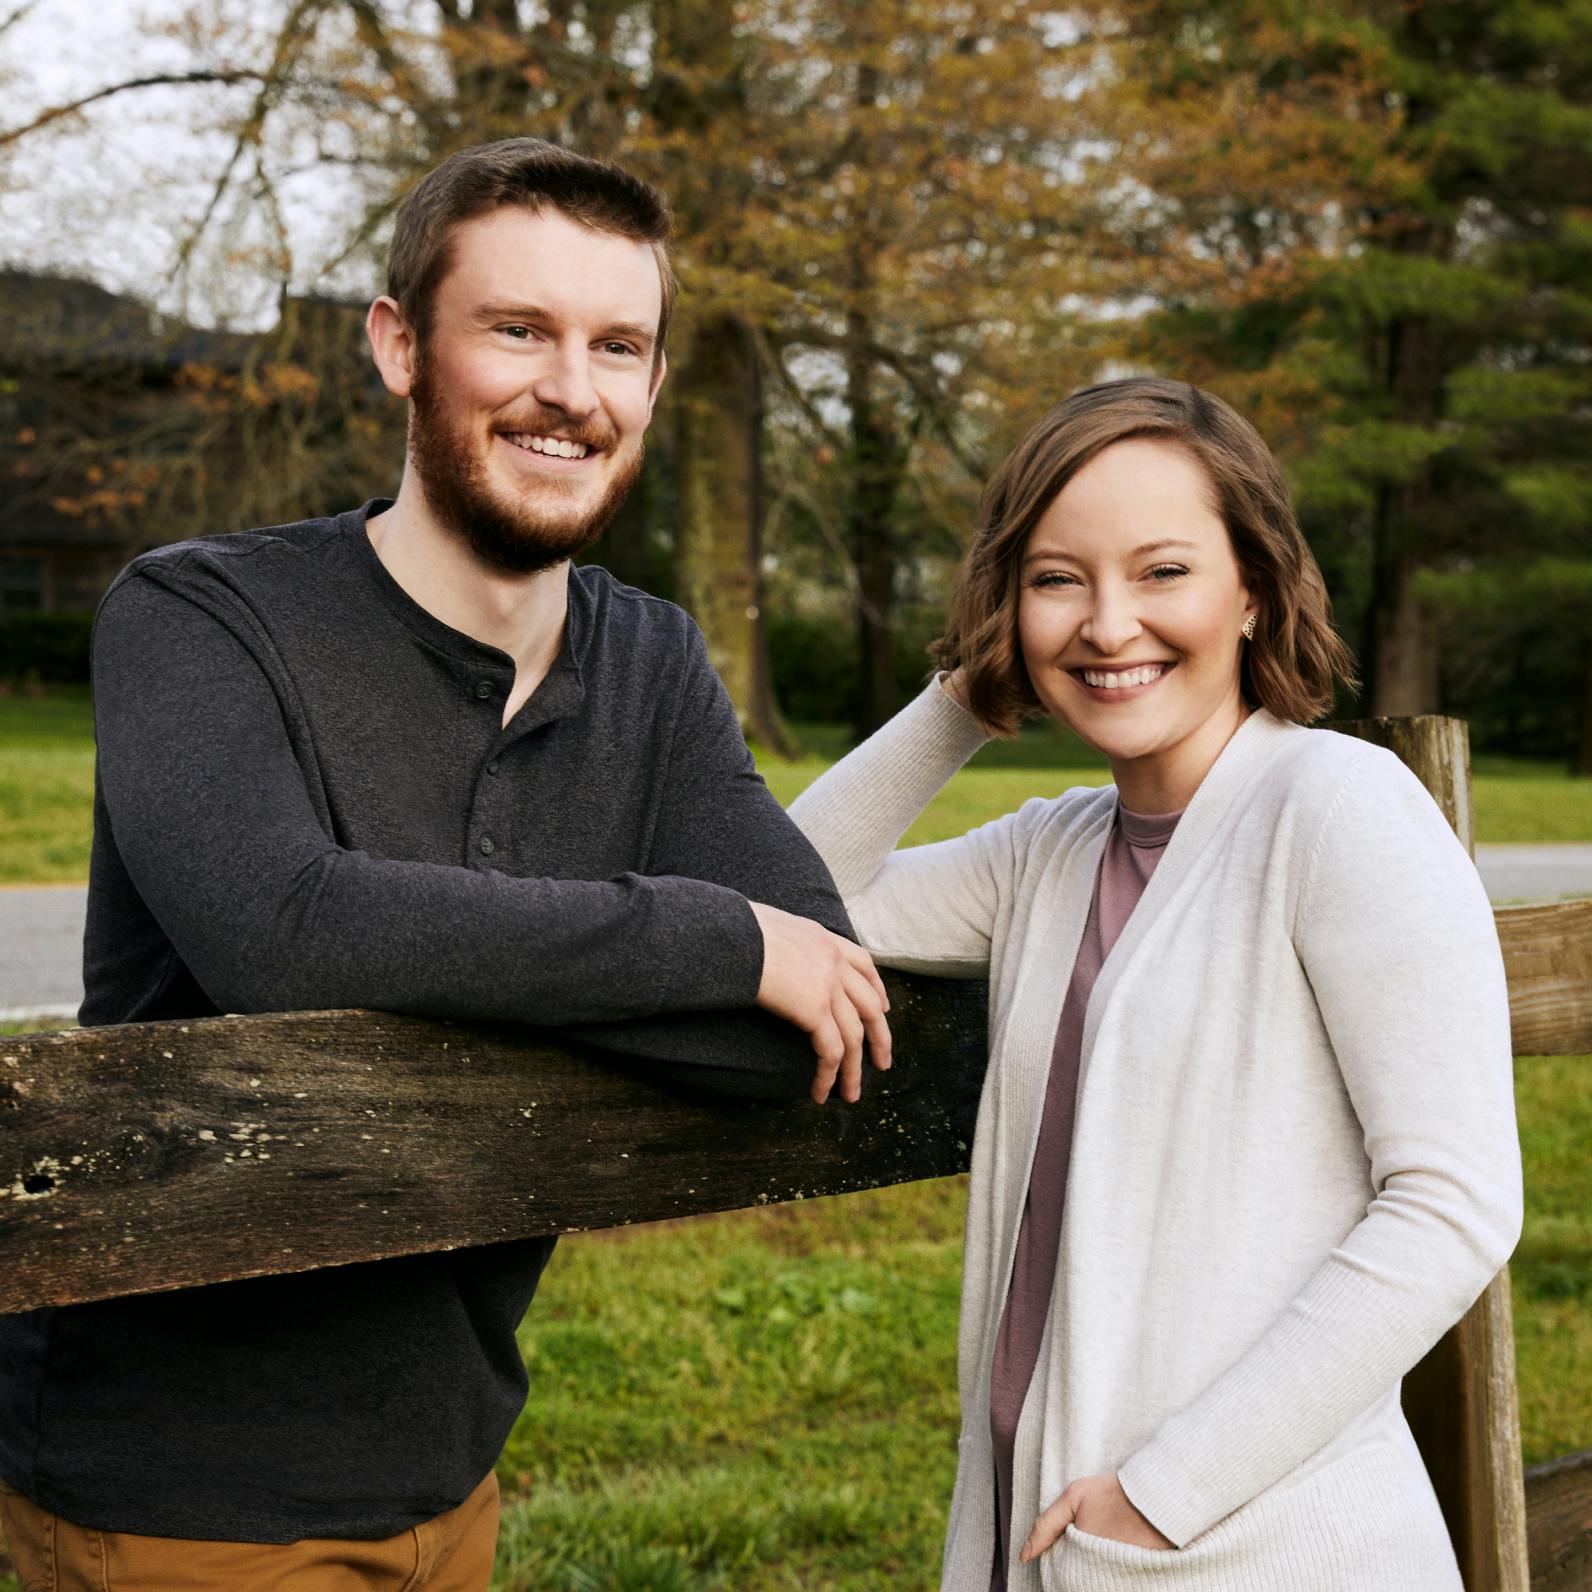 Stephen & Jessica, ministry partners, from Missouri